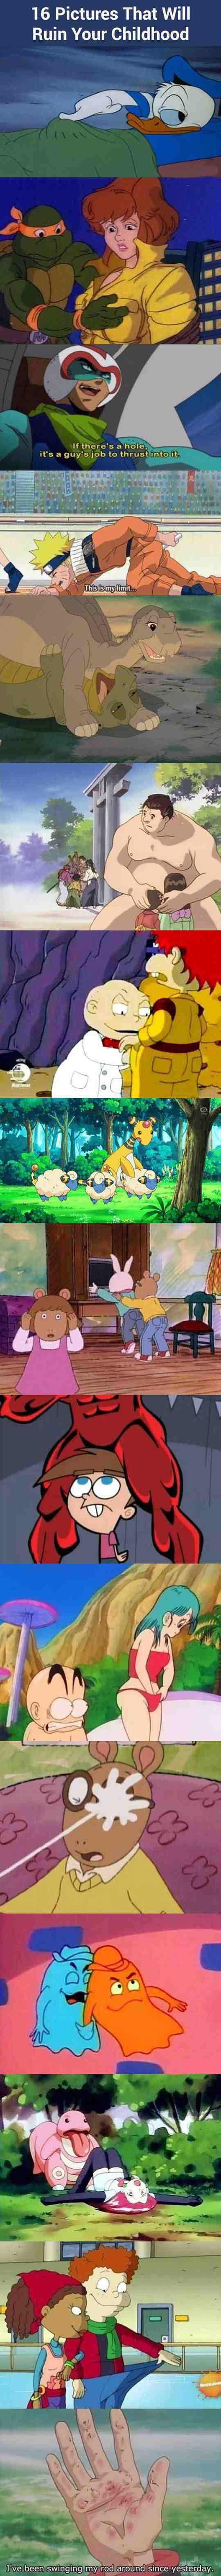 16 Pictures That Will Ruin Your Childhood